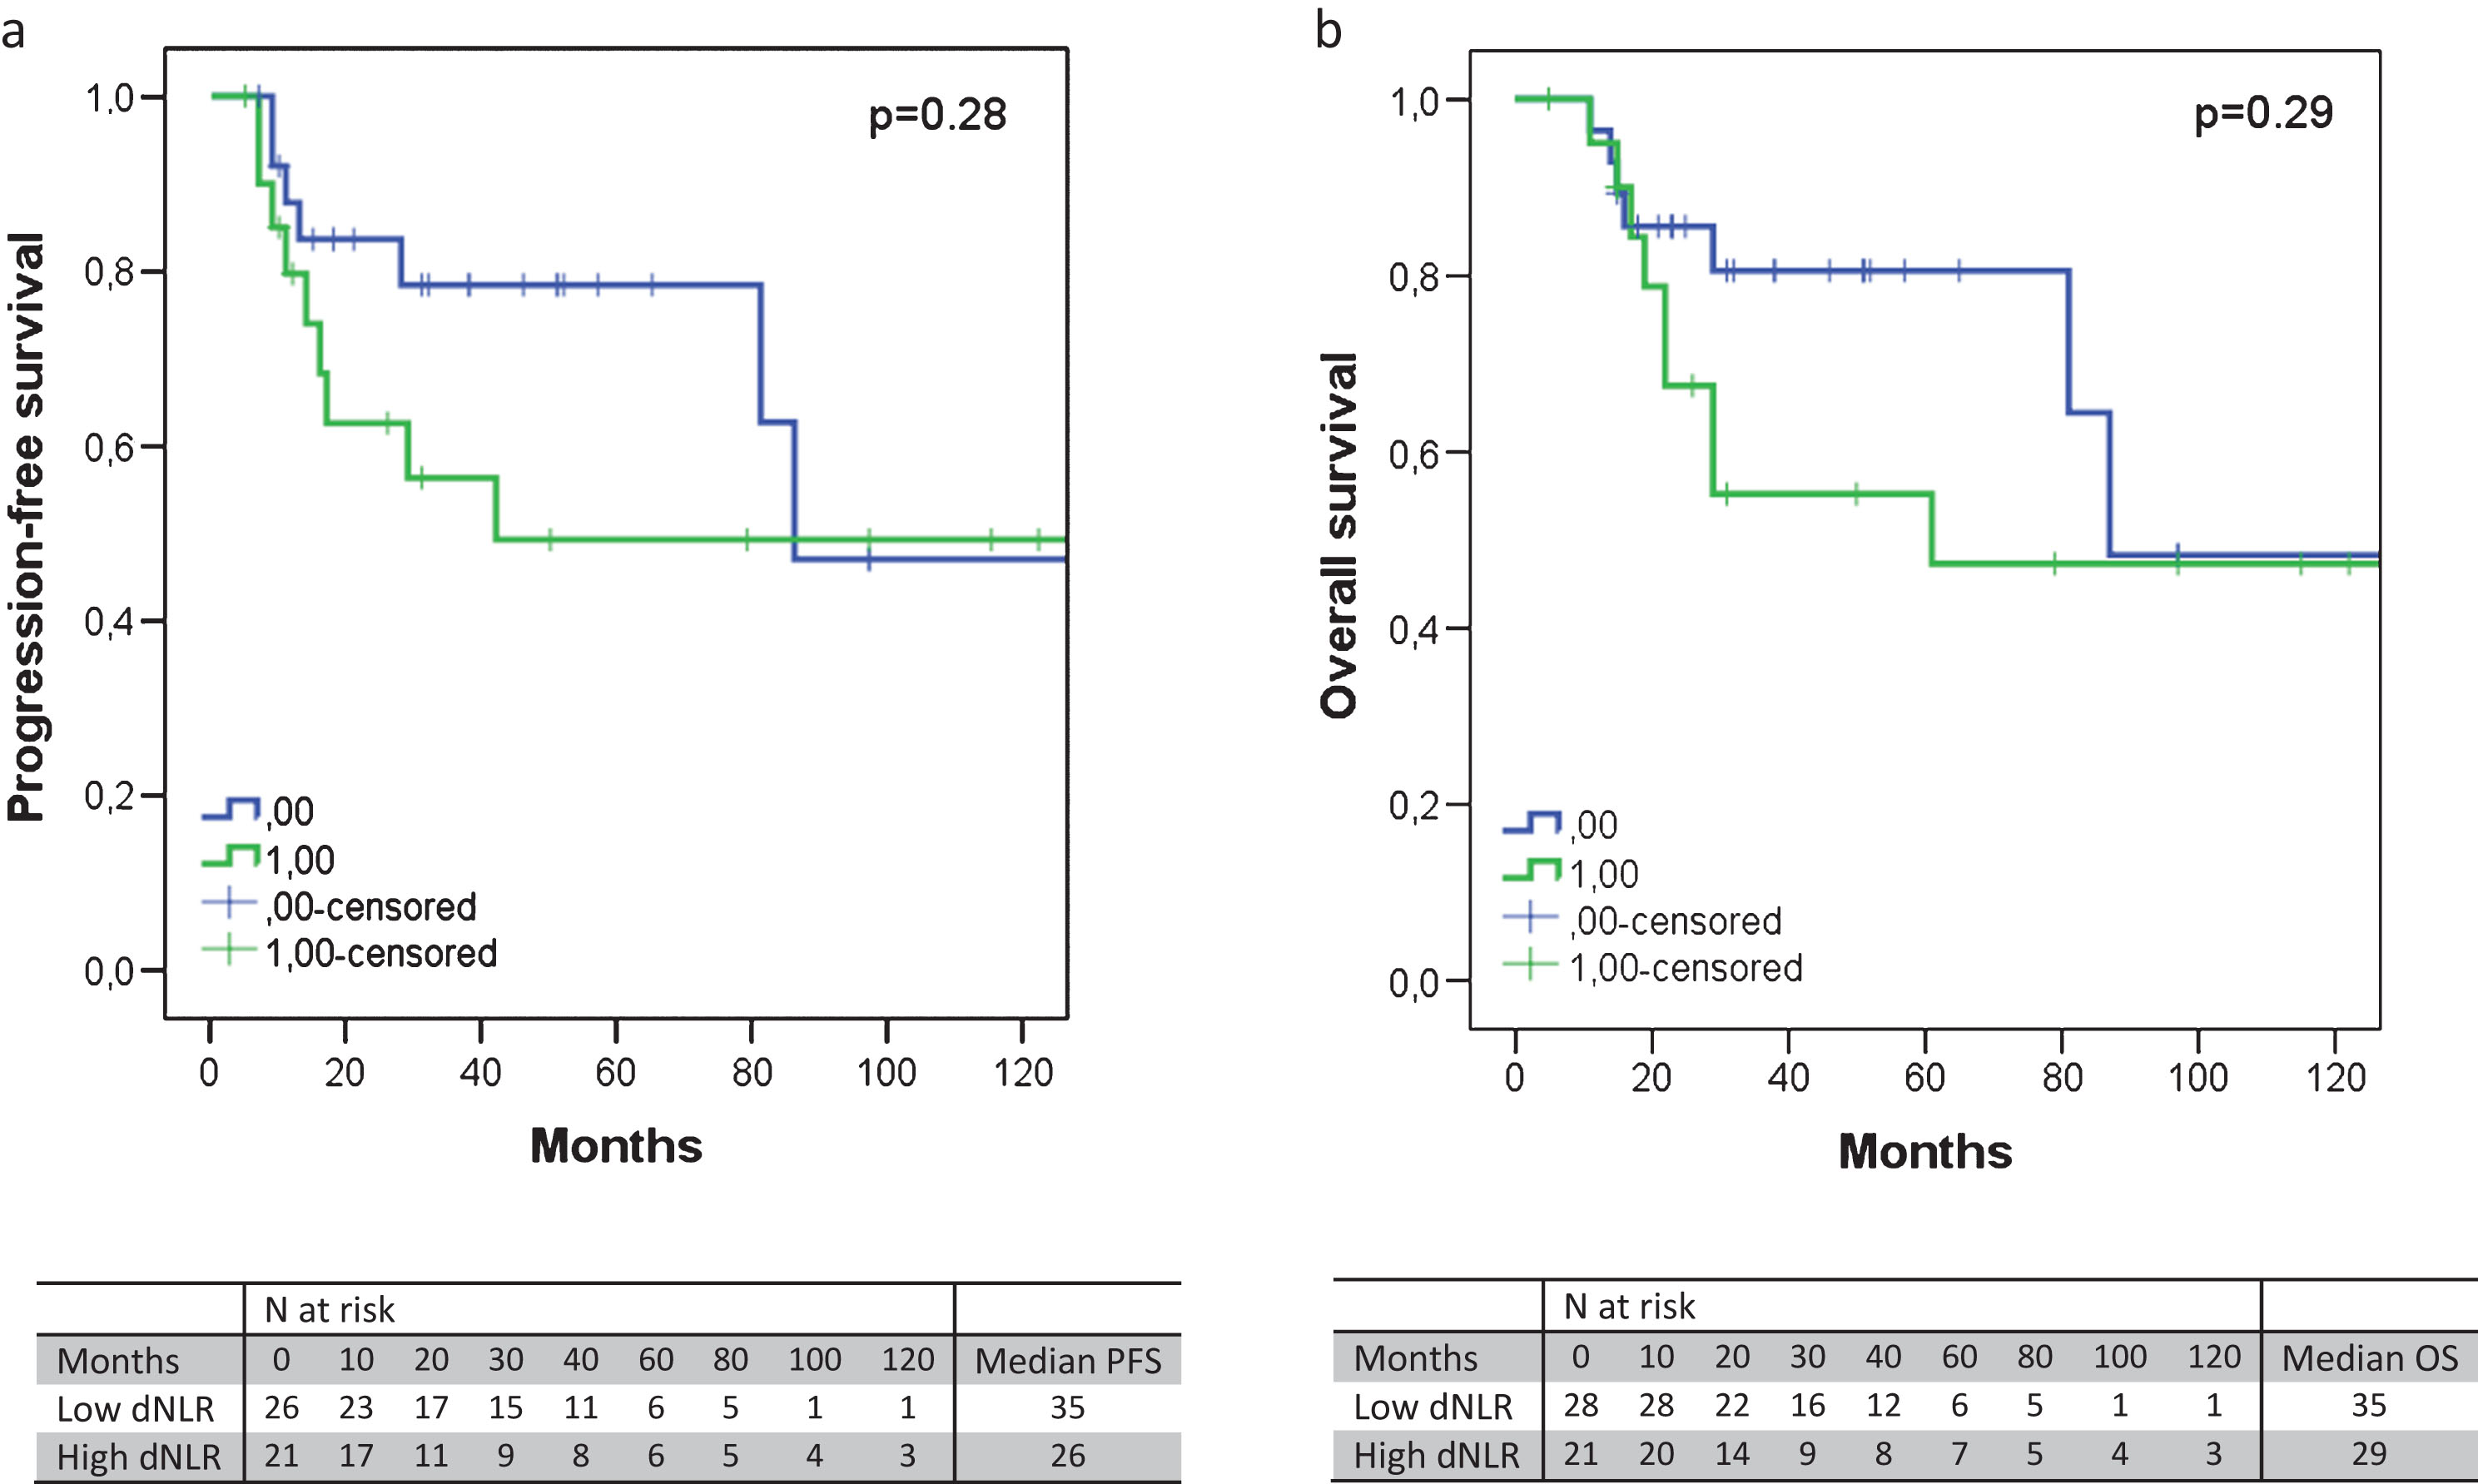 The progression-free survival (a) and overall survival (b) according to the dNLR, excluding node-positive patients. An elevated dNLR corresponded with an absolute shorter PFS (median 35 versus 26 months, p = 0.28) or OS (median 35 versus 29 months, p = 0.29), albeit not significantly.